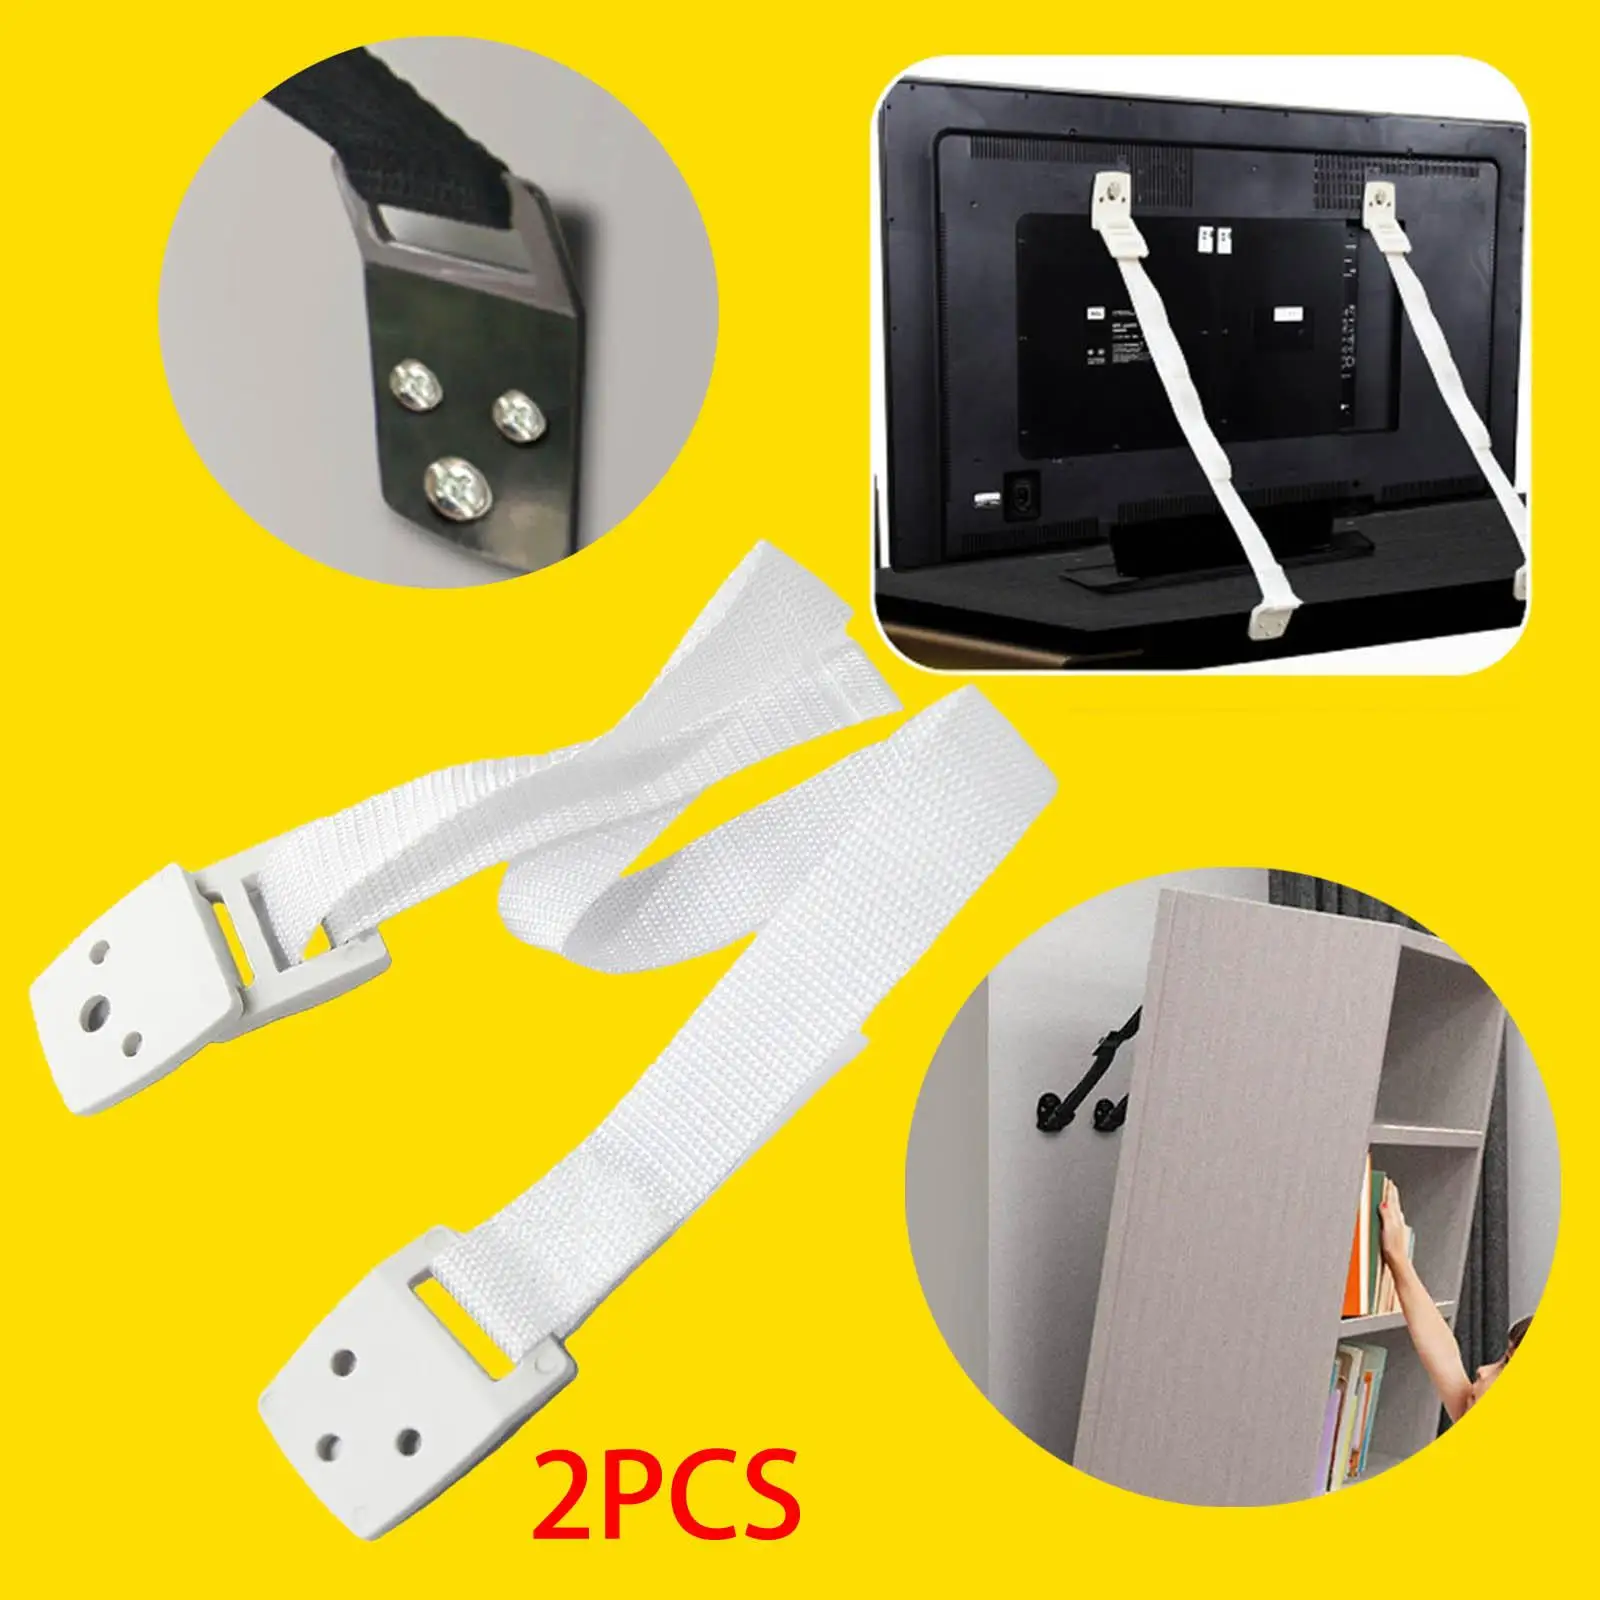 TV Anti Tip Straps Adjustable  Non Tipping Safety Strap Cable for Dresser Shelves Kids Proofing Protection Child